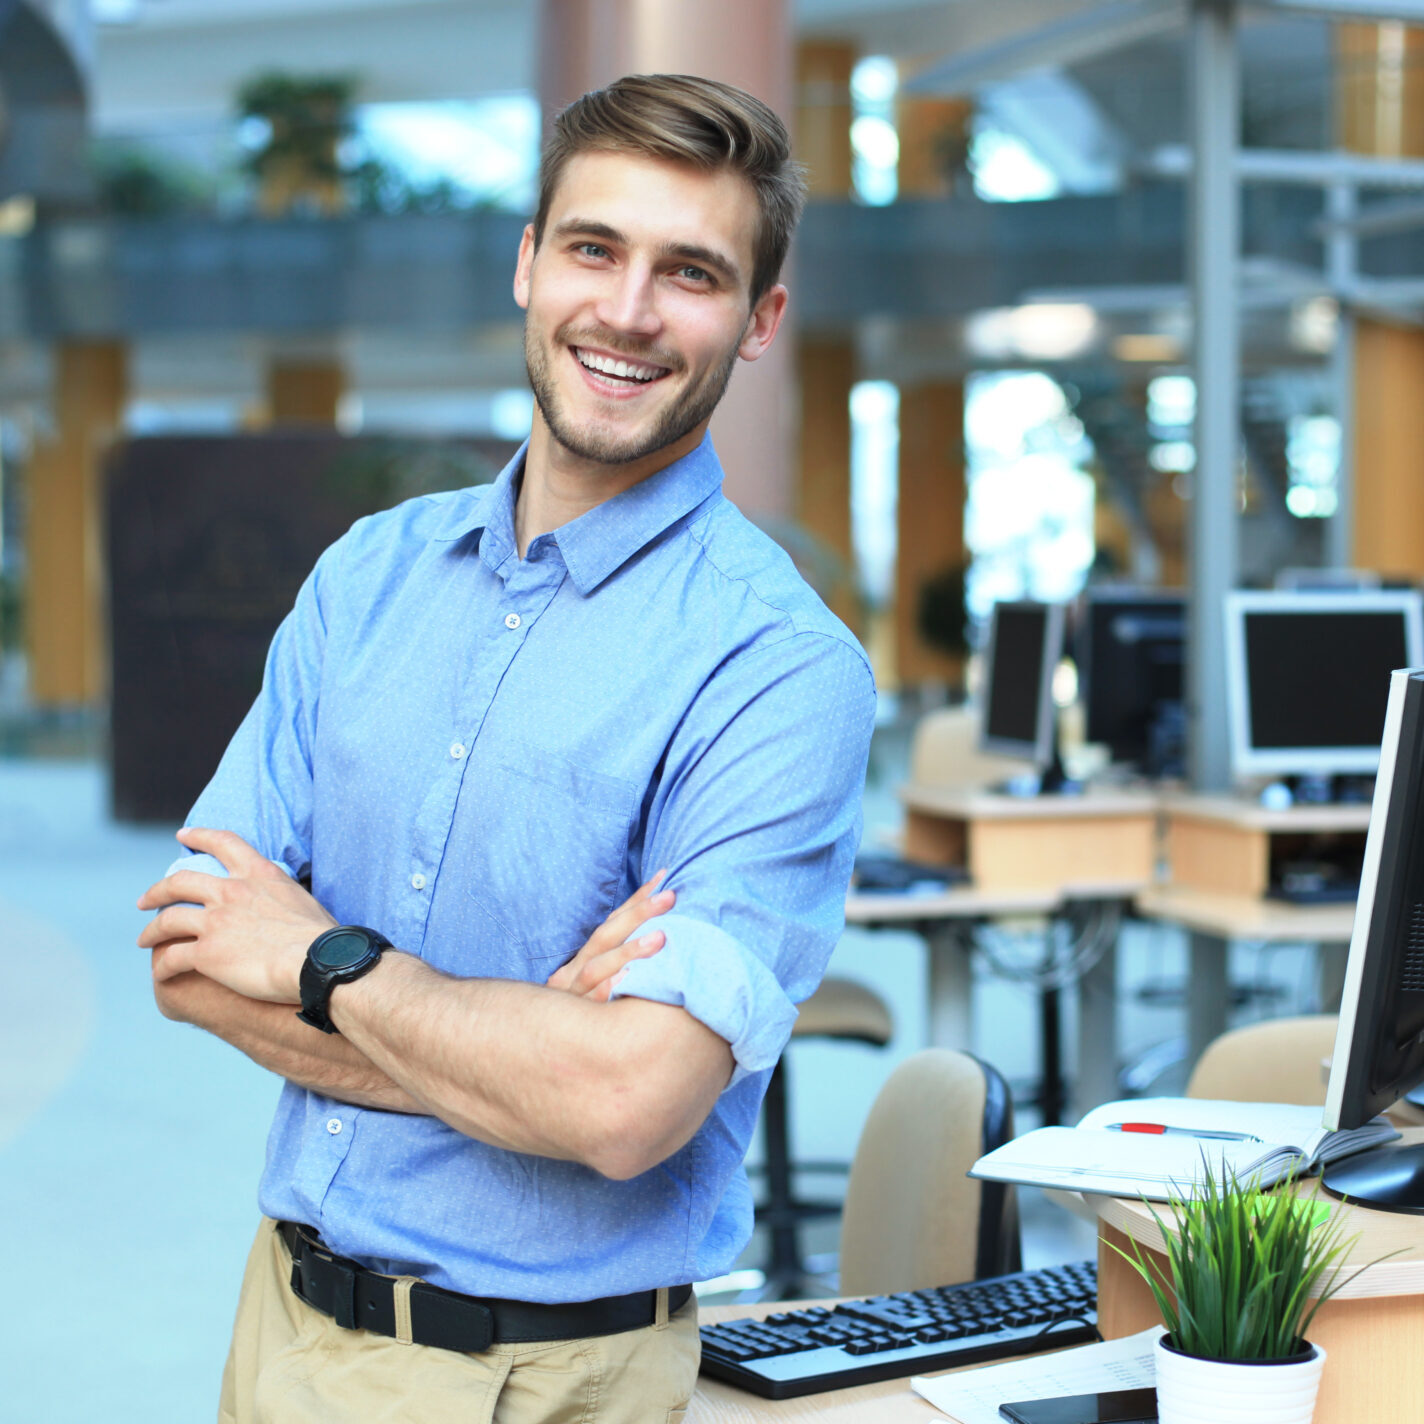 Young man posing confident and positive in professional workplace office with space